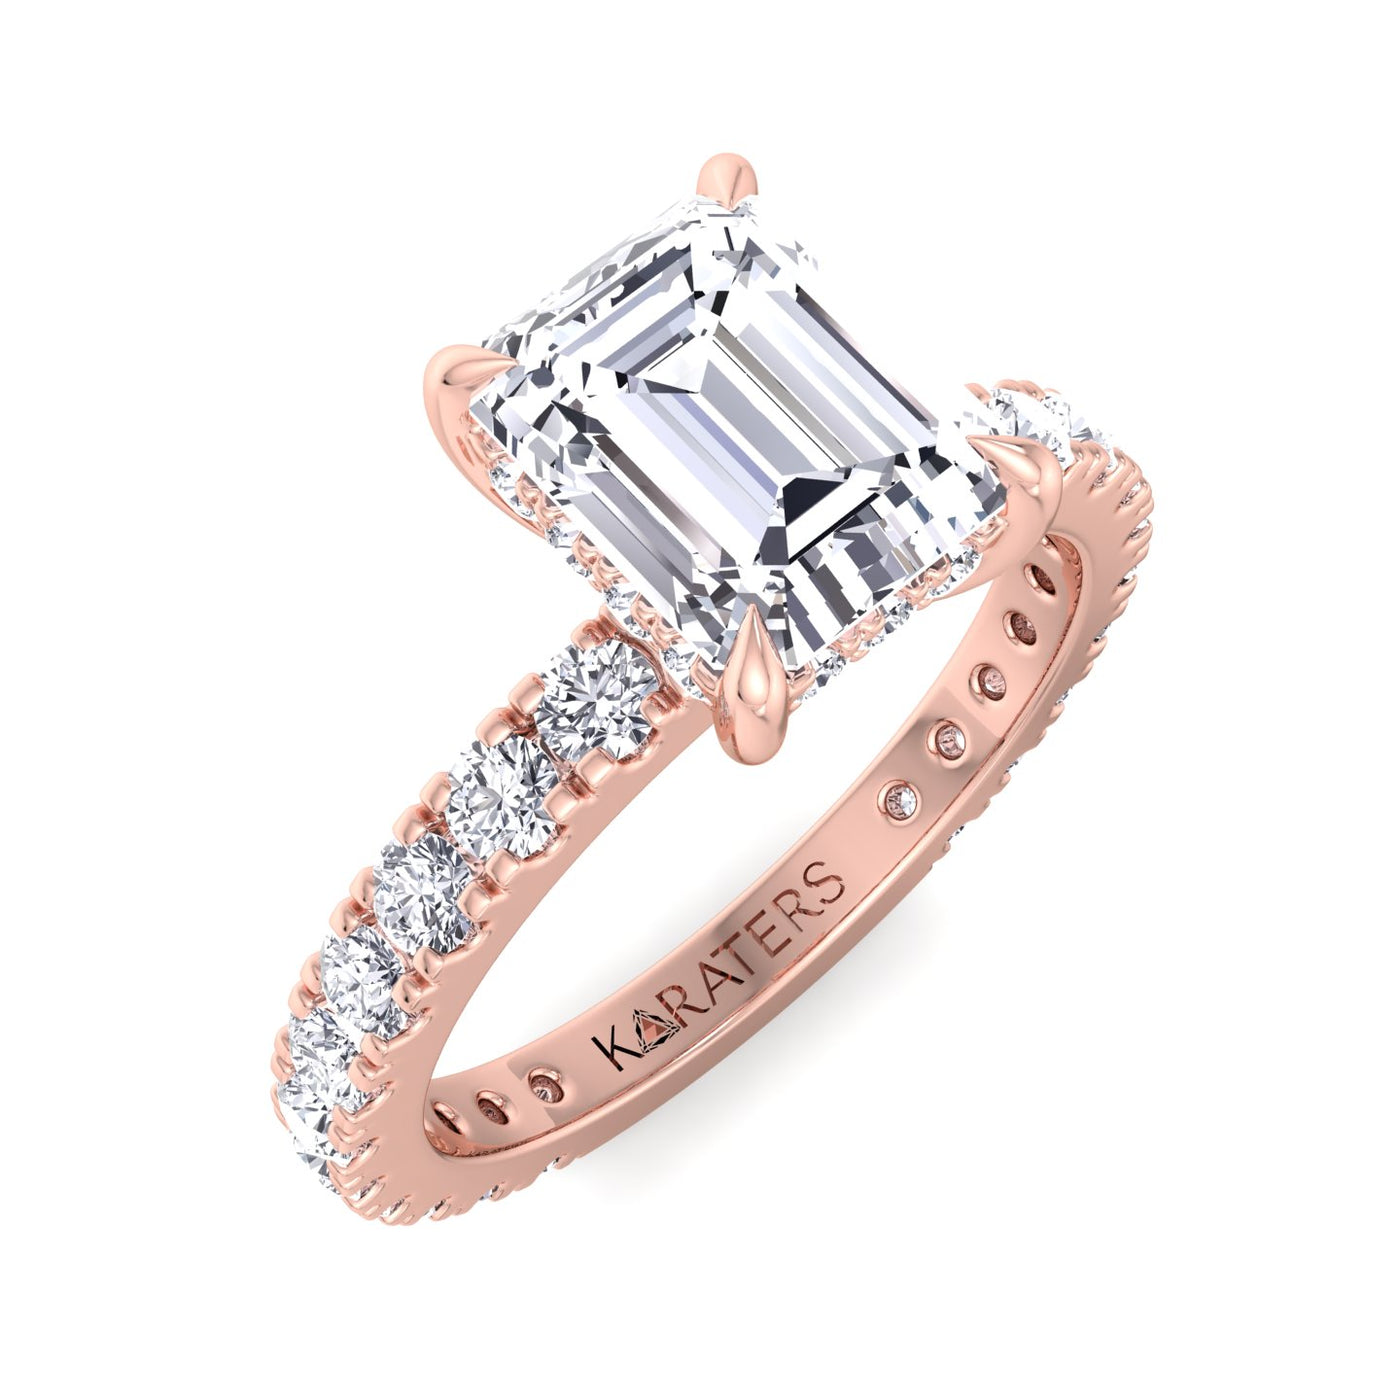 emerald-cut-lab-grown-diamond-engagement-ring-with-hidden-halo-side-stones-in-solid-rose-gold